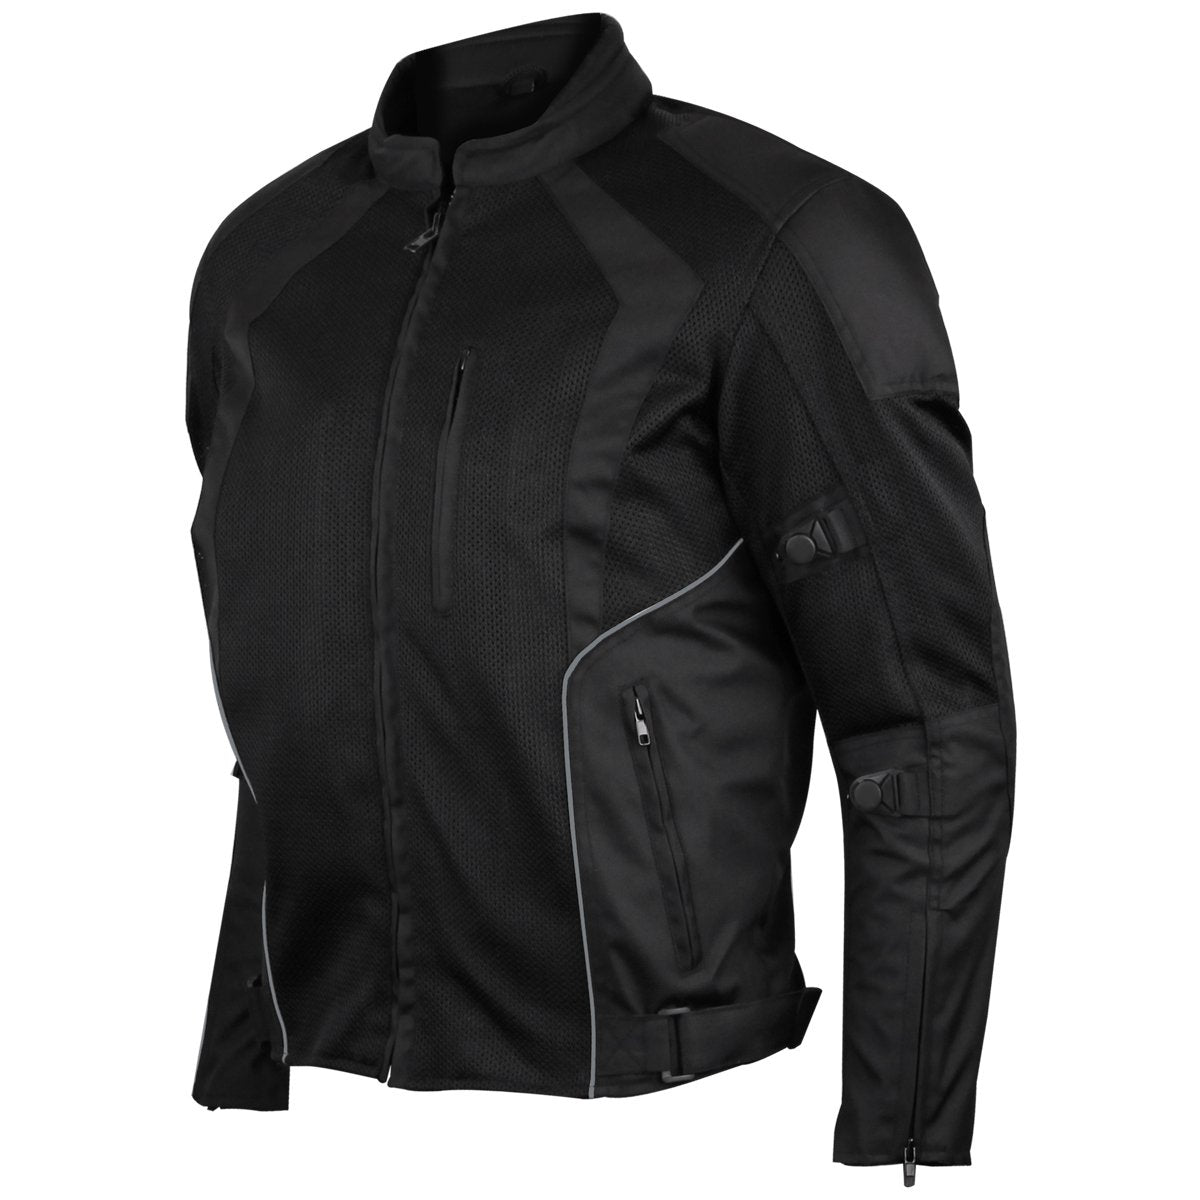 Vance Leather Men's Black Mesh Motorcycle Jacket with CE Armor